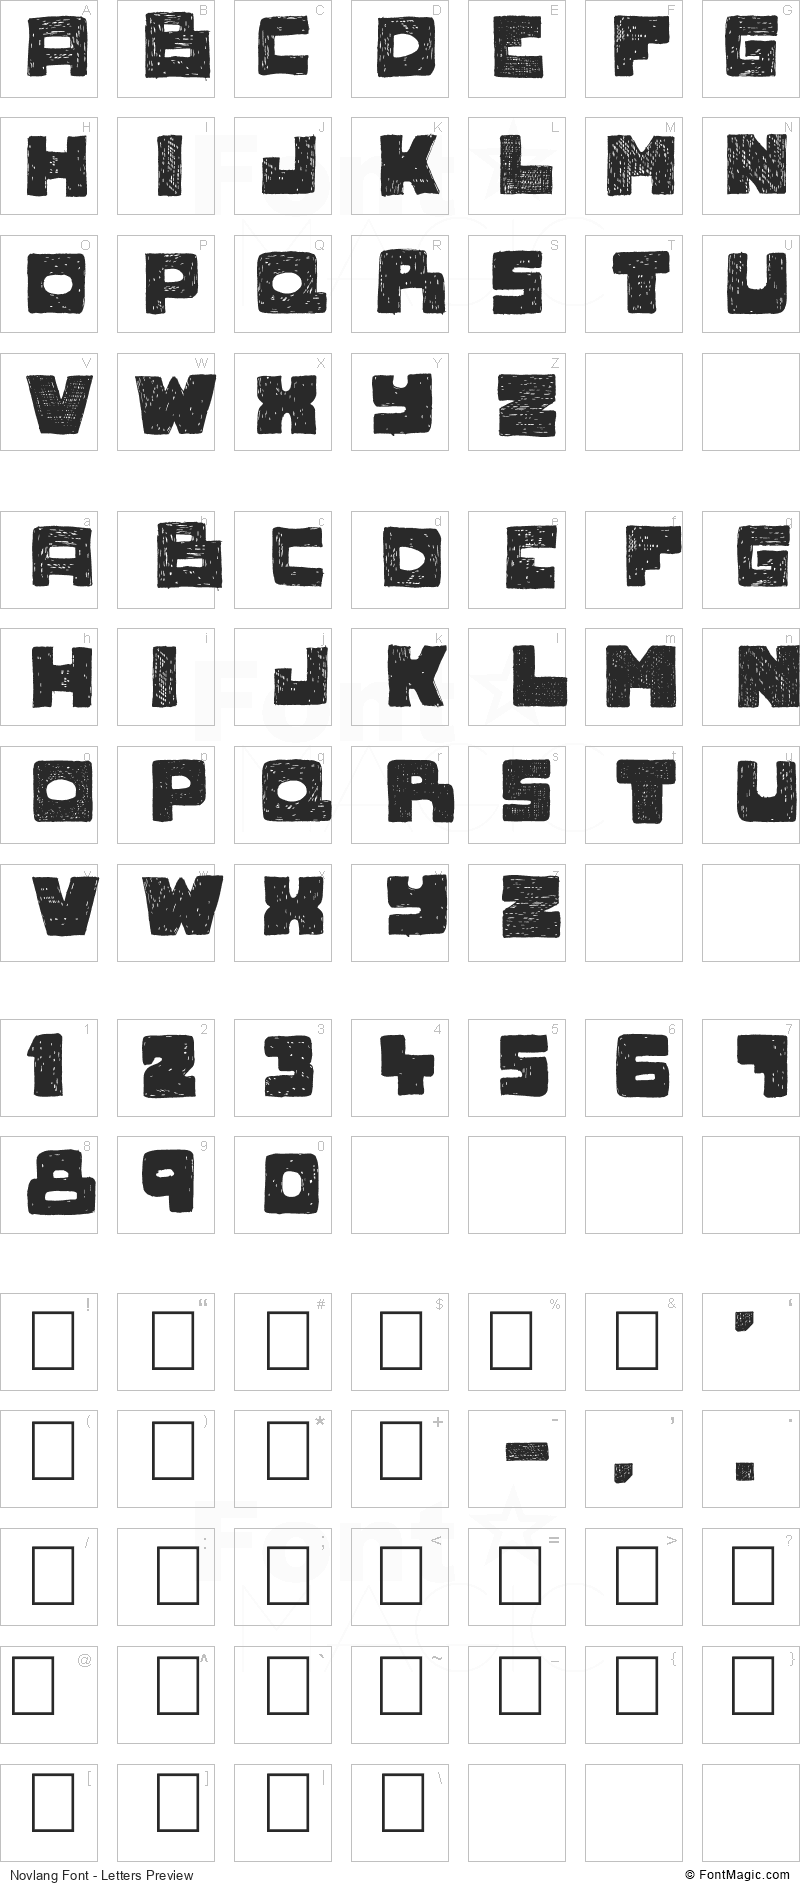 Novlang Font - All Latters Preview Chart